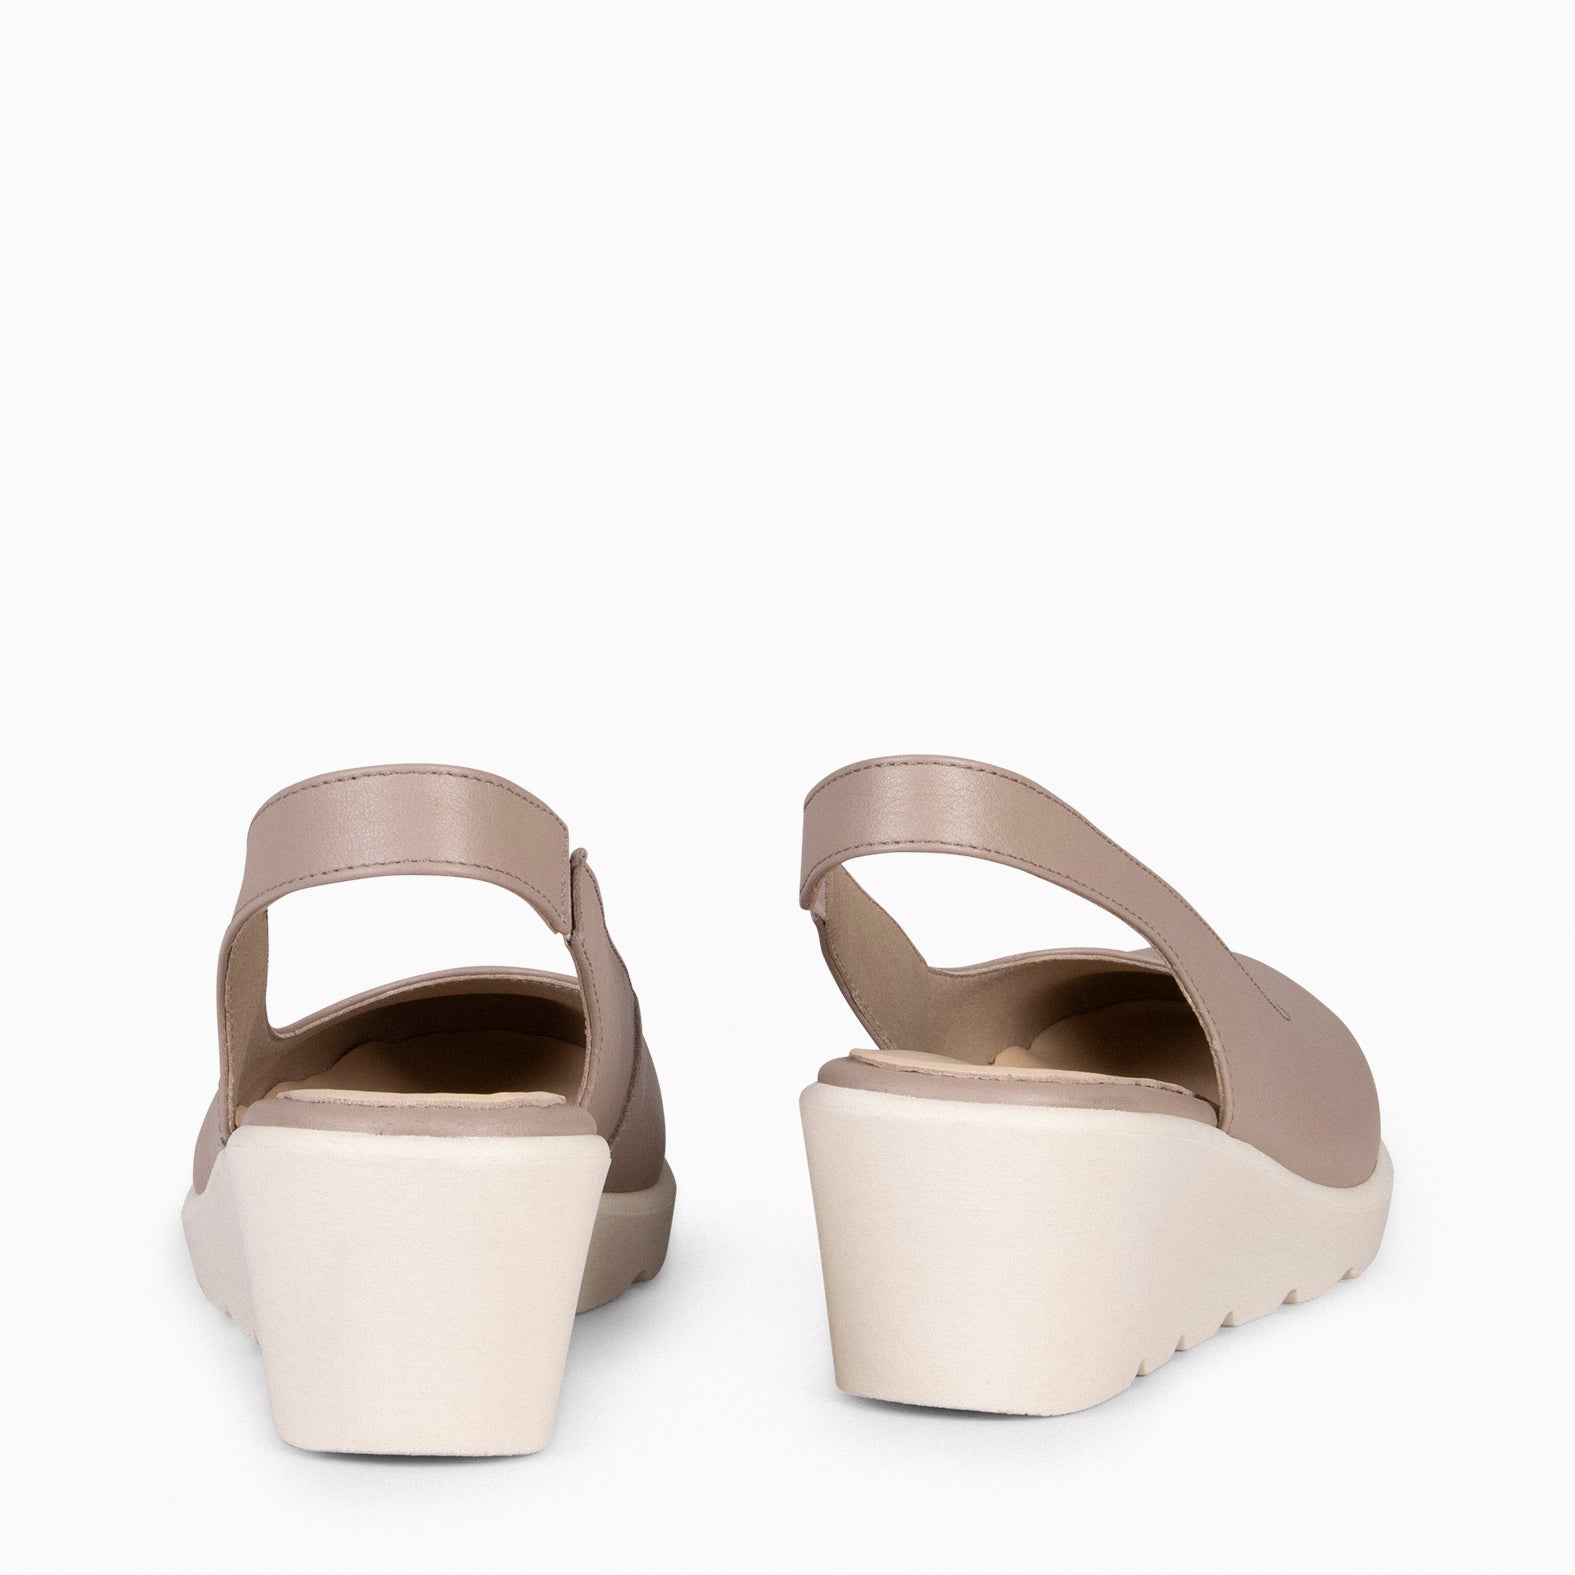 CLARISSE – TAUPE WEDGE SLINGBACK SHOES